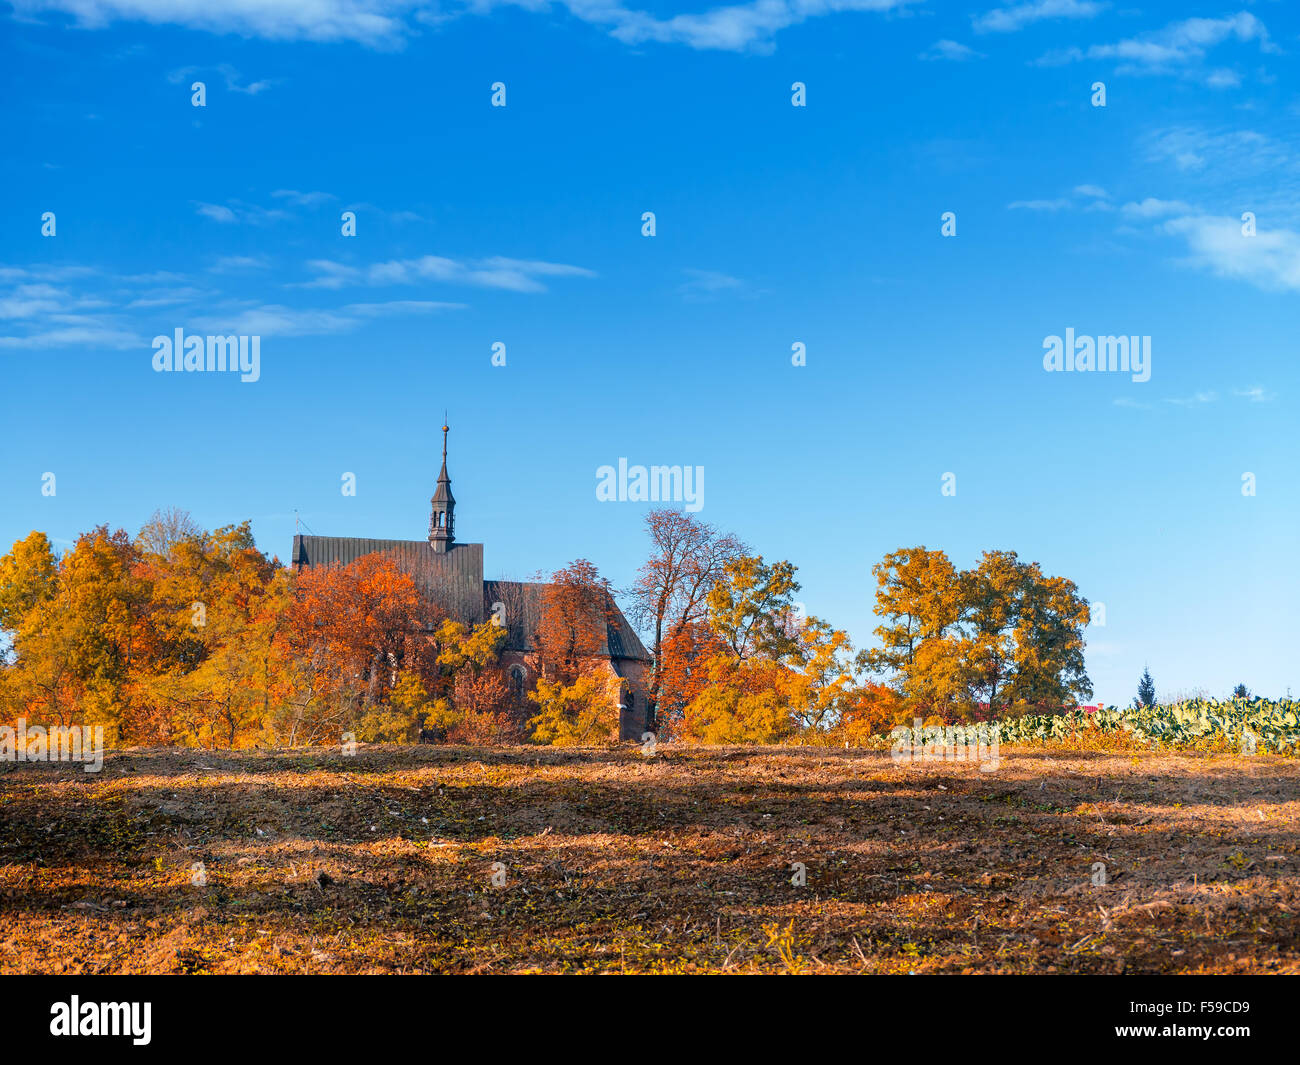 Countryside old catholic church surrounded by trees in fall colors Stock Photo